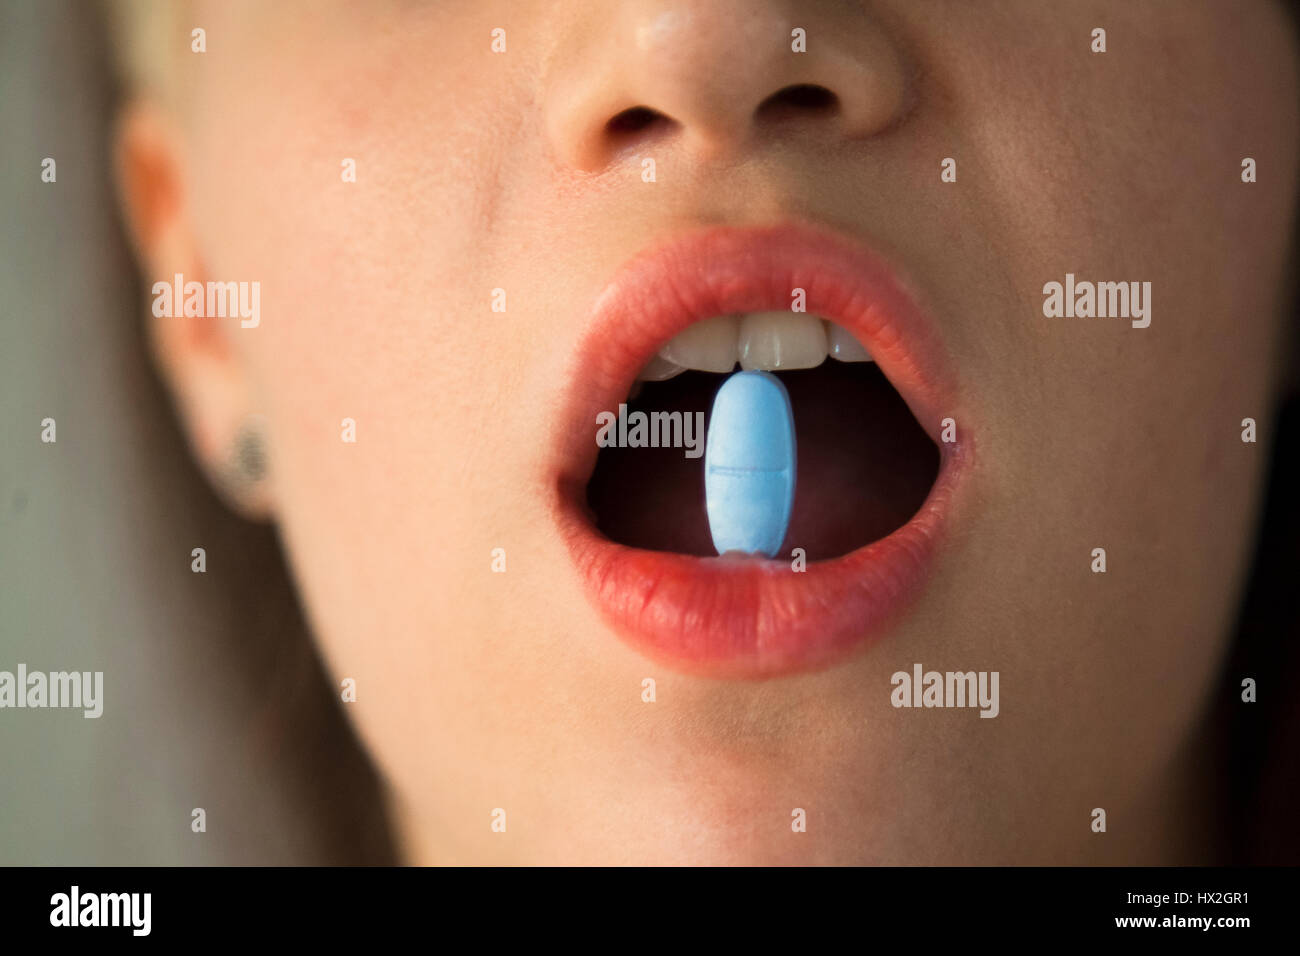 Vitamins And Pills.  Taking Medicine, Holding Pill between teeth.  Open Mouth. Supplements, Health Concept. Stock Photo